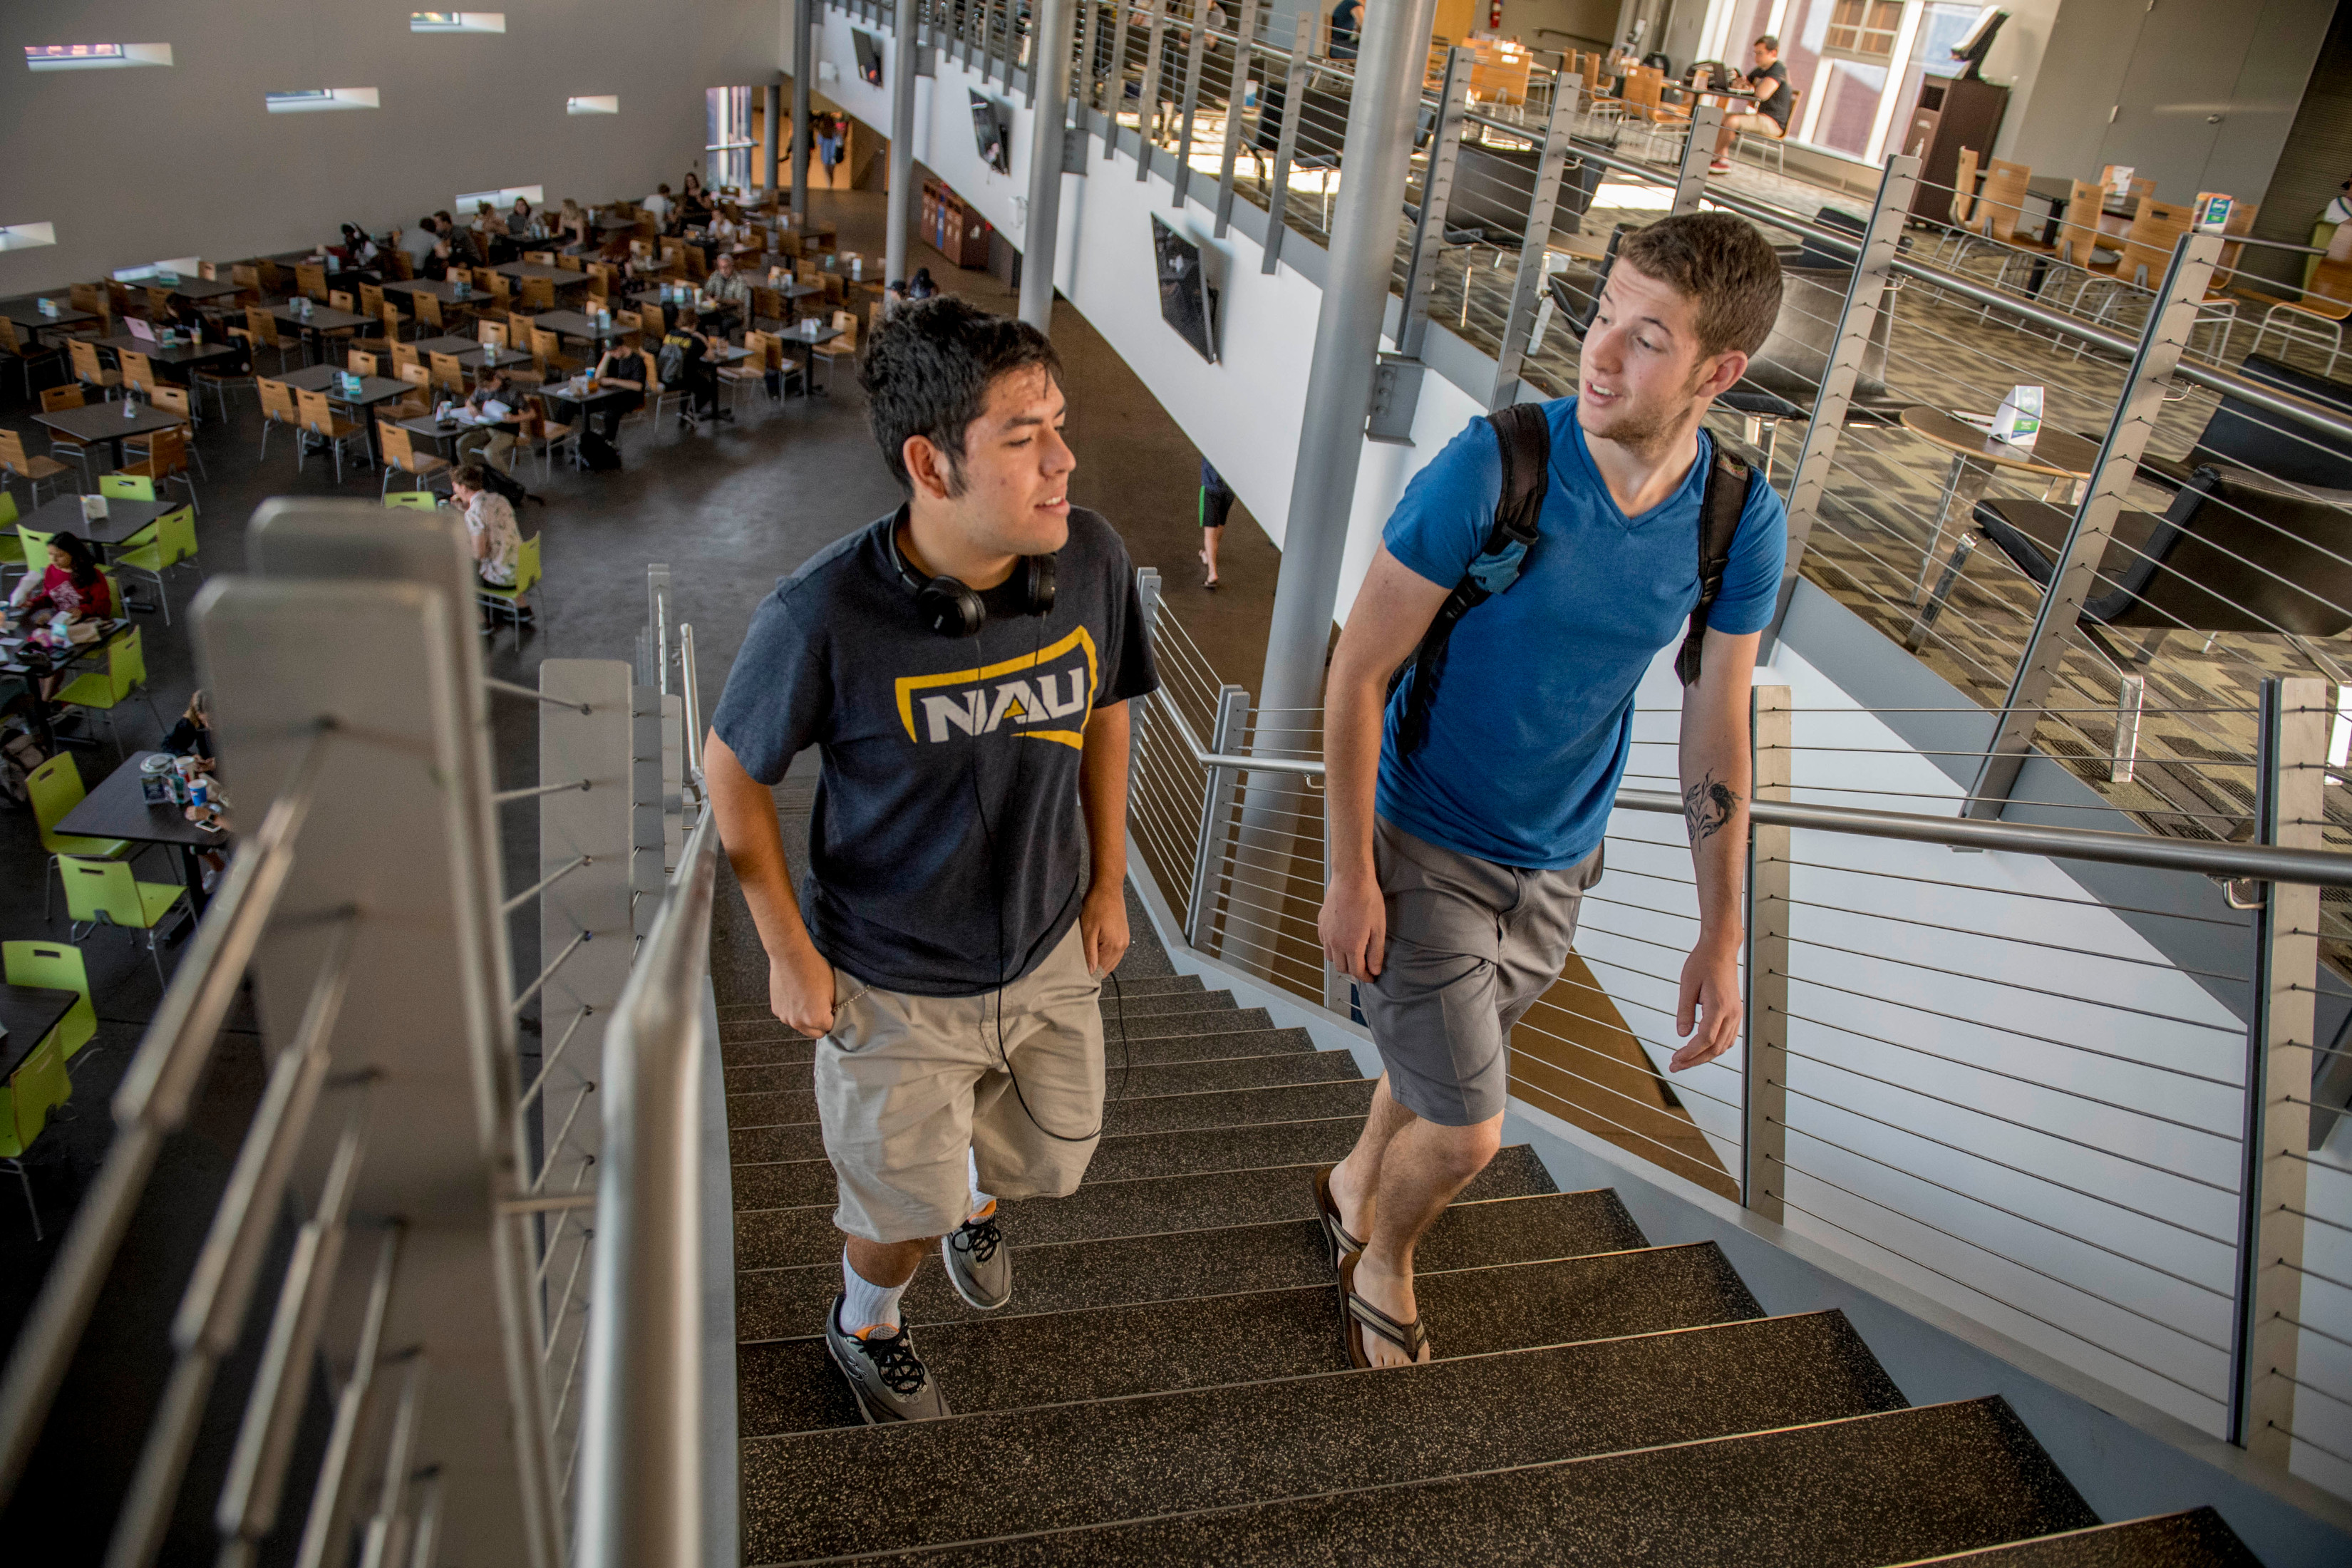 Students walking up the stairs.